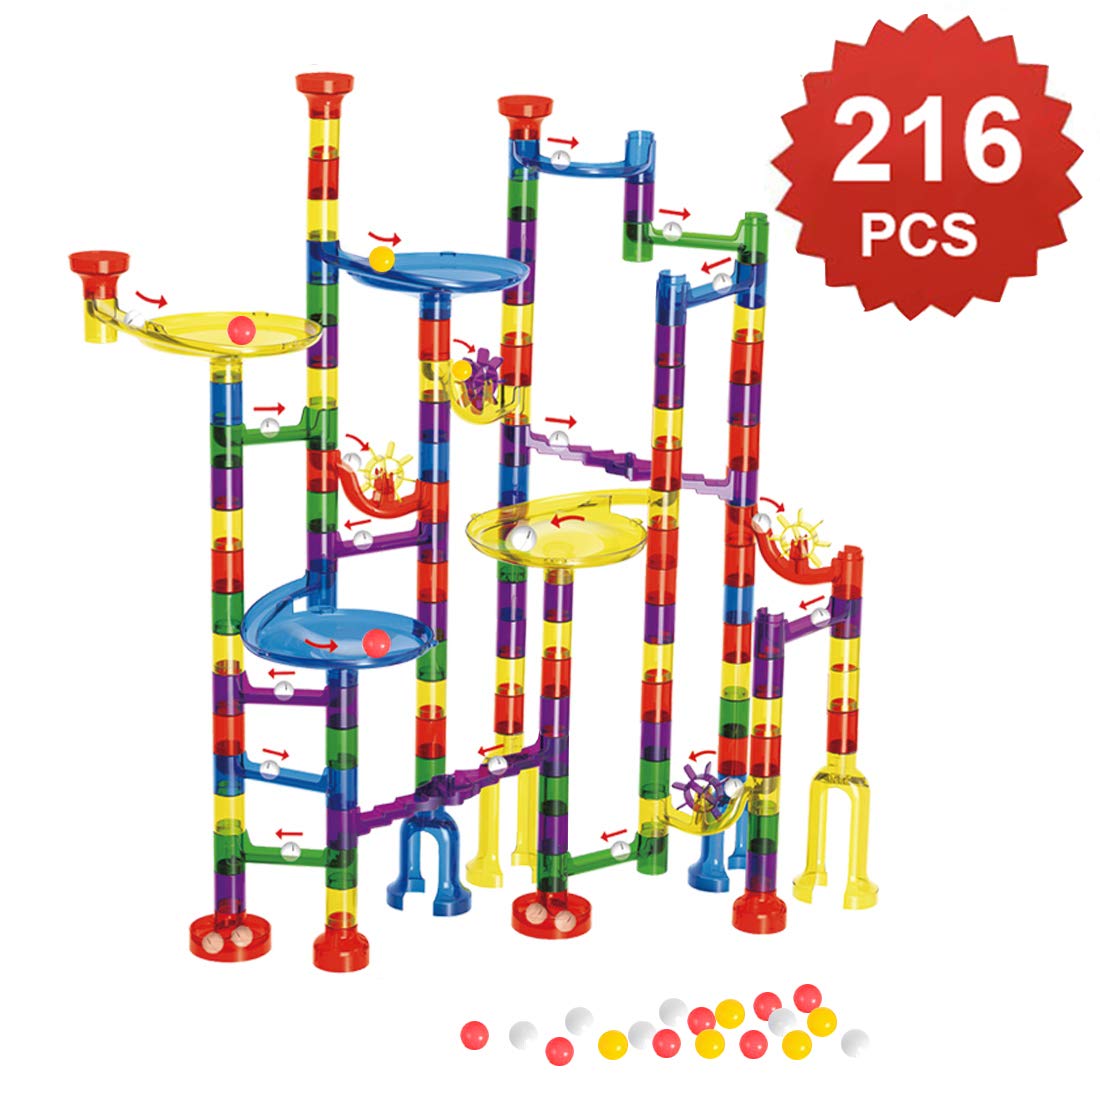 Review of WTOR 216Pcs Marble Run Super Set Toys Marble Maze Game Educational Learning